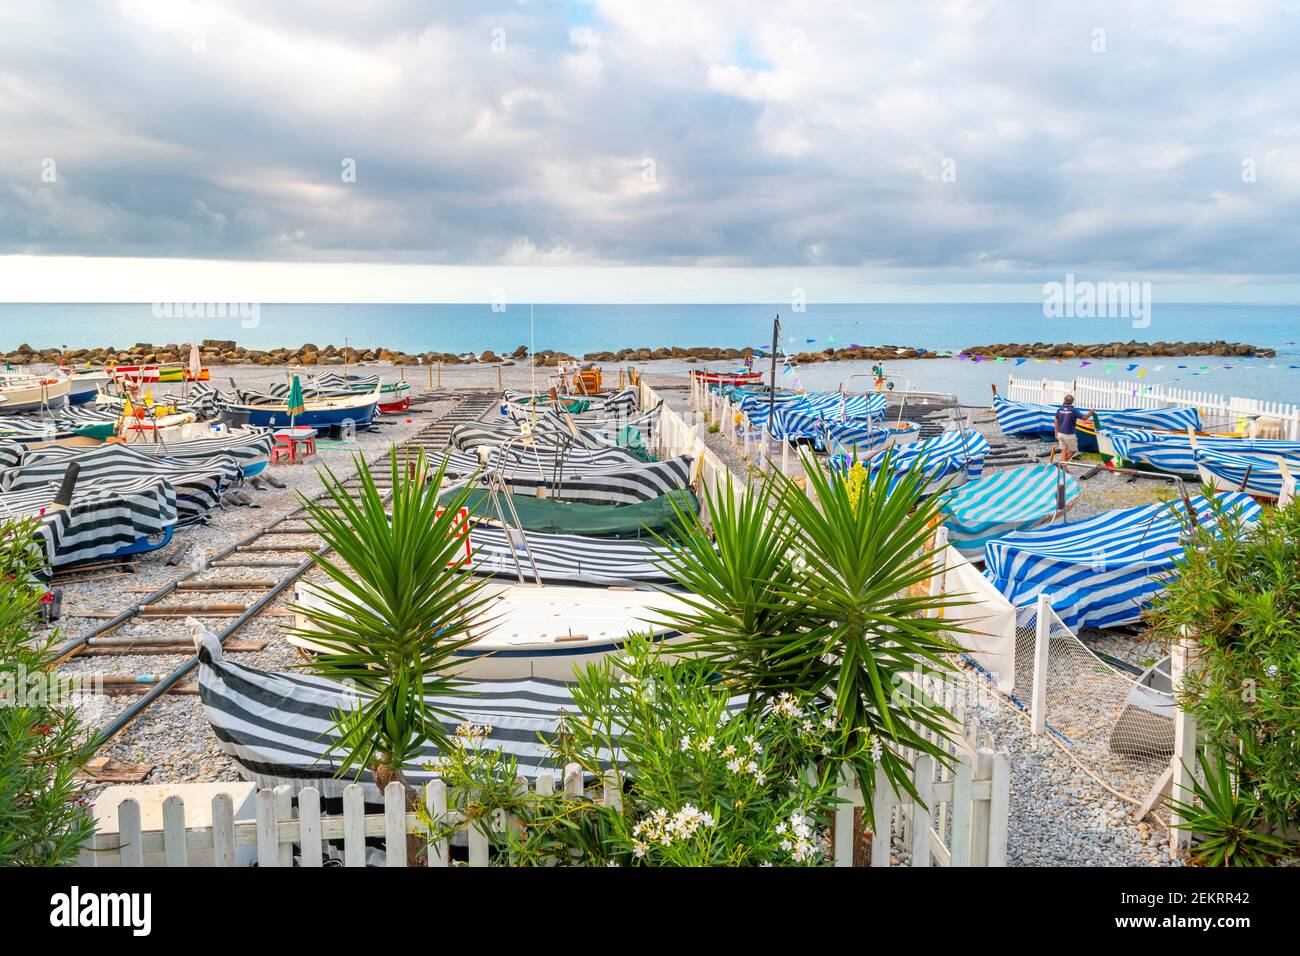 Italian Riviera Hotel High Resolution Stock Photography and Images - Alamy